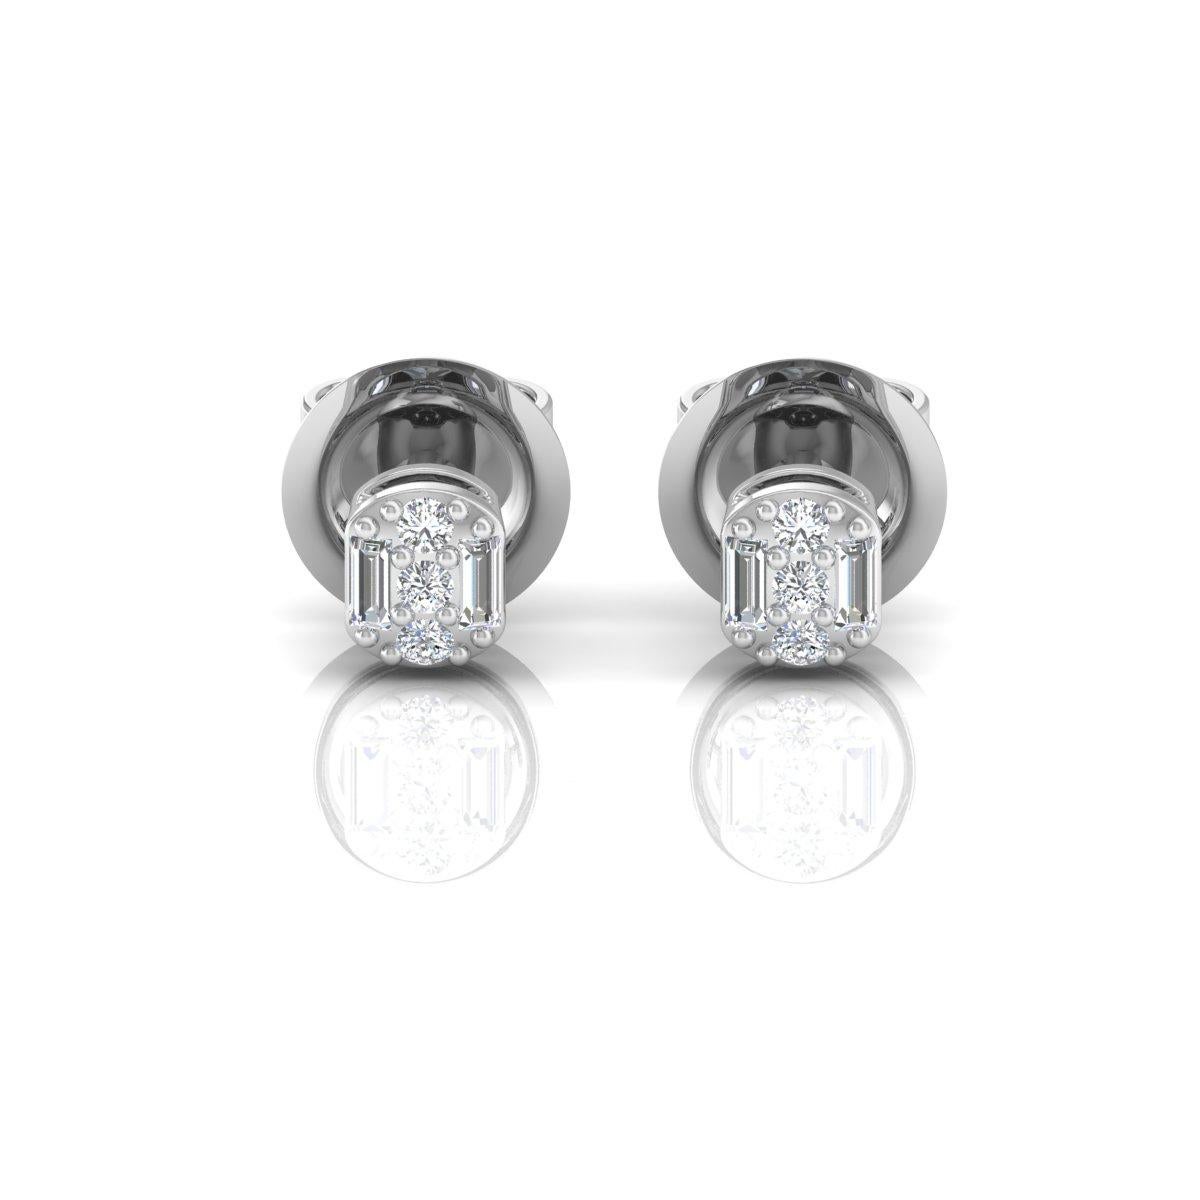 Modern 0.2 Carat SI Clarity HI Color Diamond Stud Earrings Solid 10k White Gold Jewelry For Sale